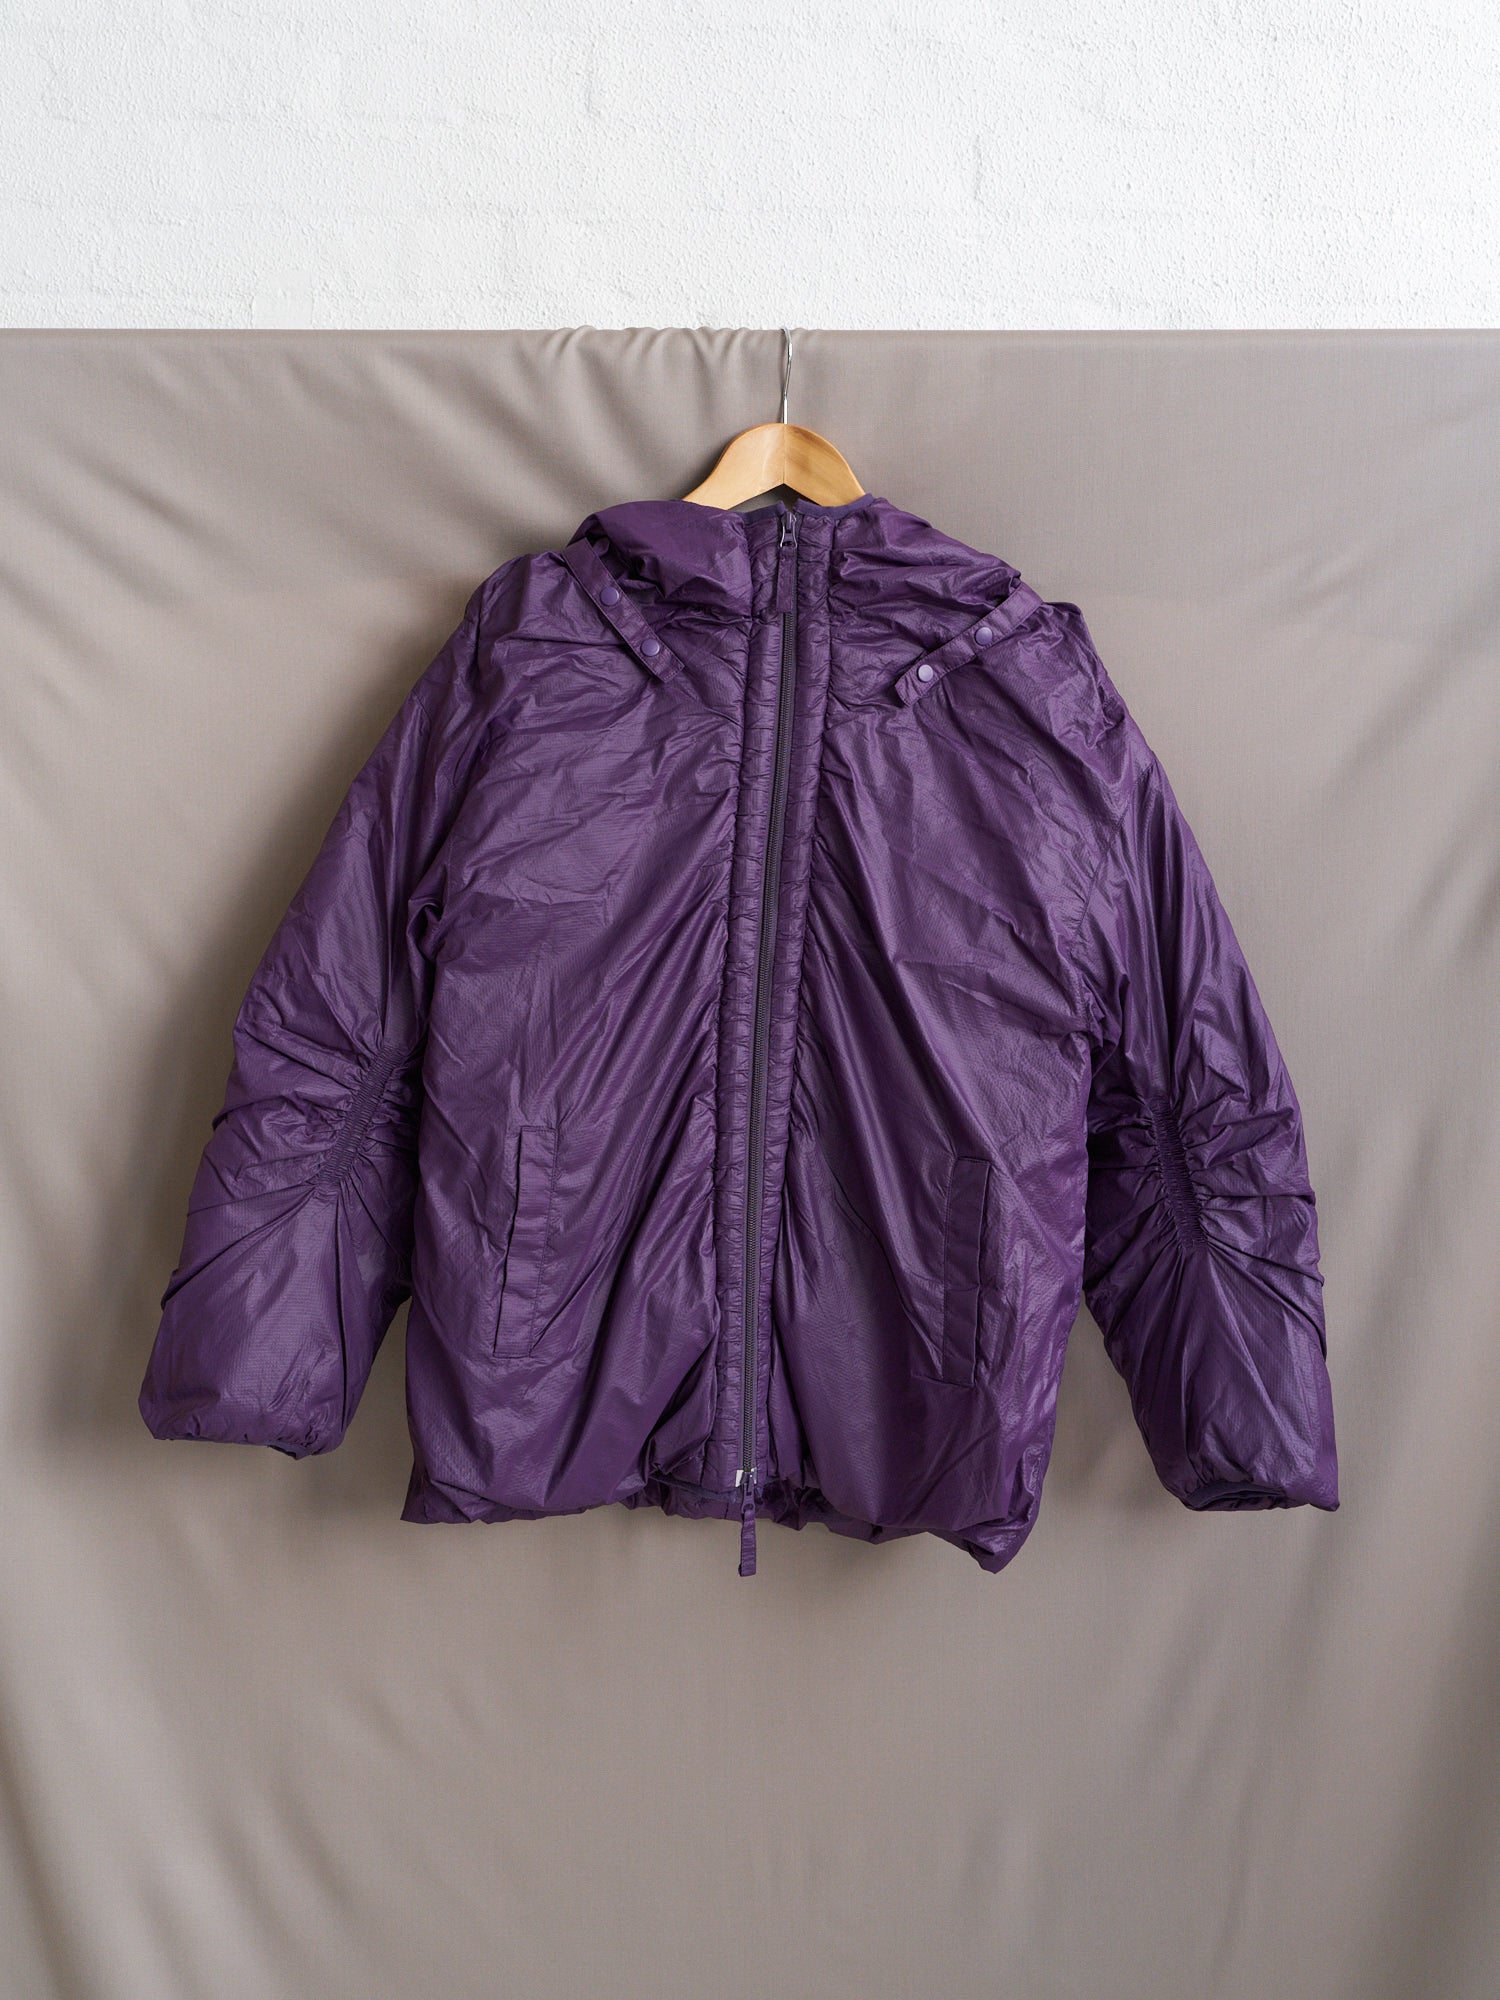 Final Home 1990s purple ripstop nylon hooded down jacket - mens S